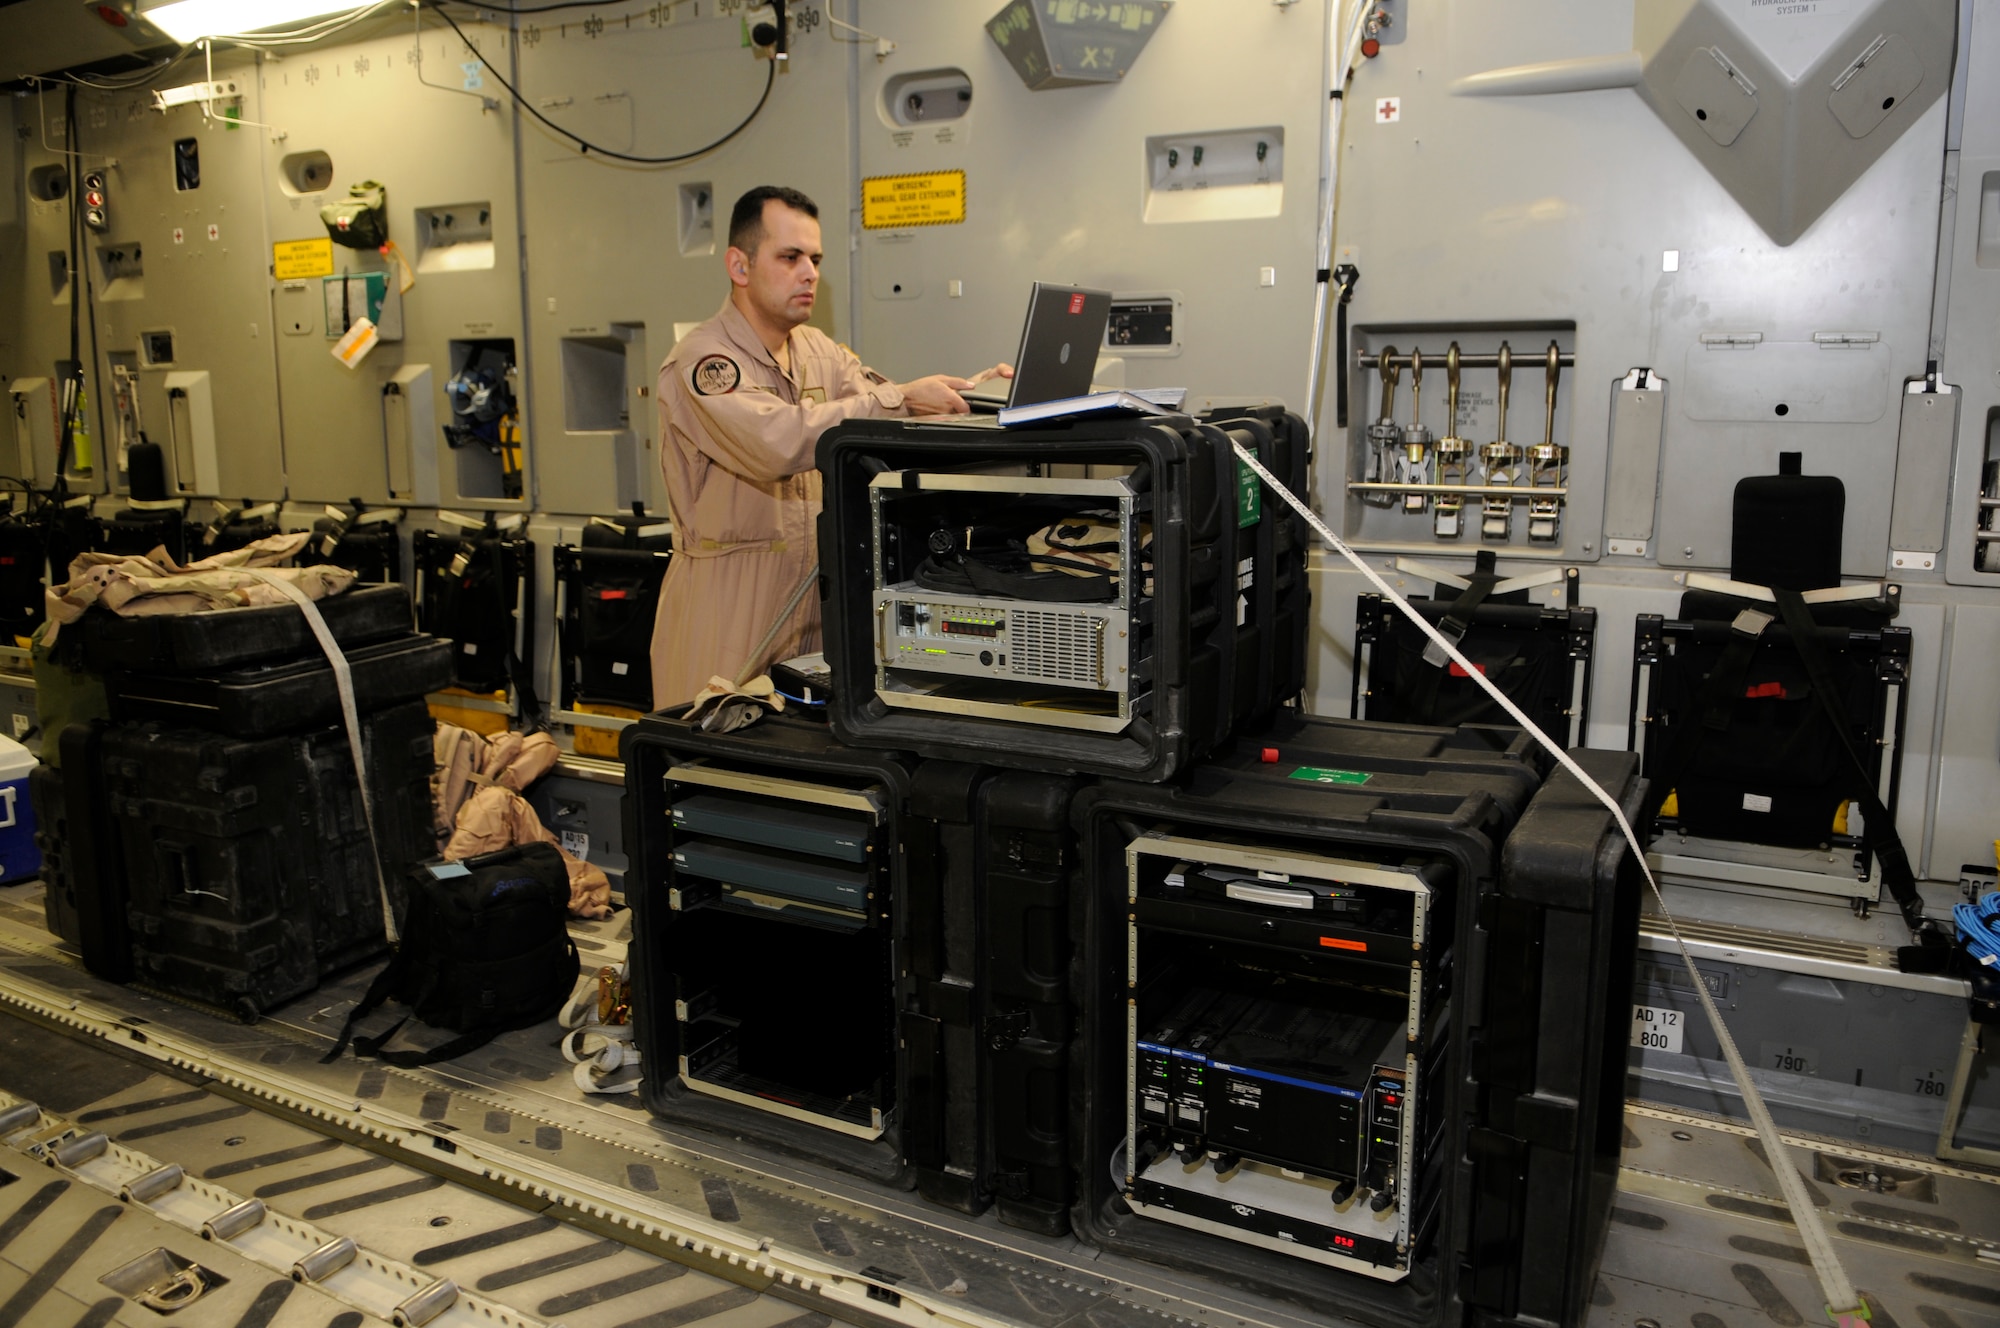 Staff Sgt. Roland Bazan, 379th Expeditionary Communications Squadron, performs an operational check of the secure internet network at a Southwest Asia air base Feb 19. Sergeant Hagood ensures everything is operable before the C-17 takes off. He is deployed from Schriever Air Force Base, Colo.  (U.S. Air Force photo/Tech. Sgt. Johnny L. Saldivar)